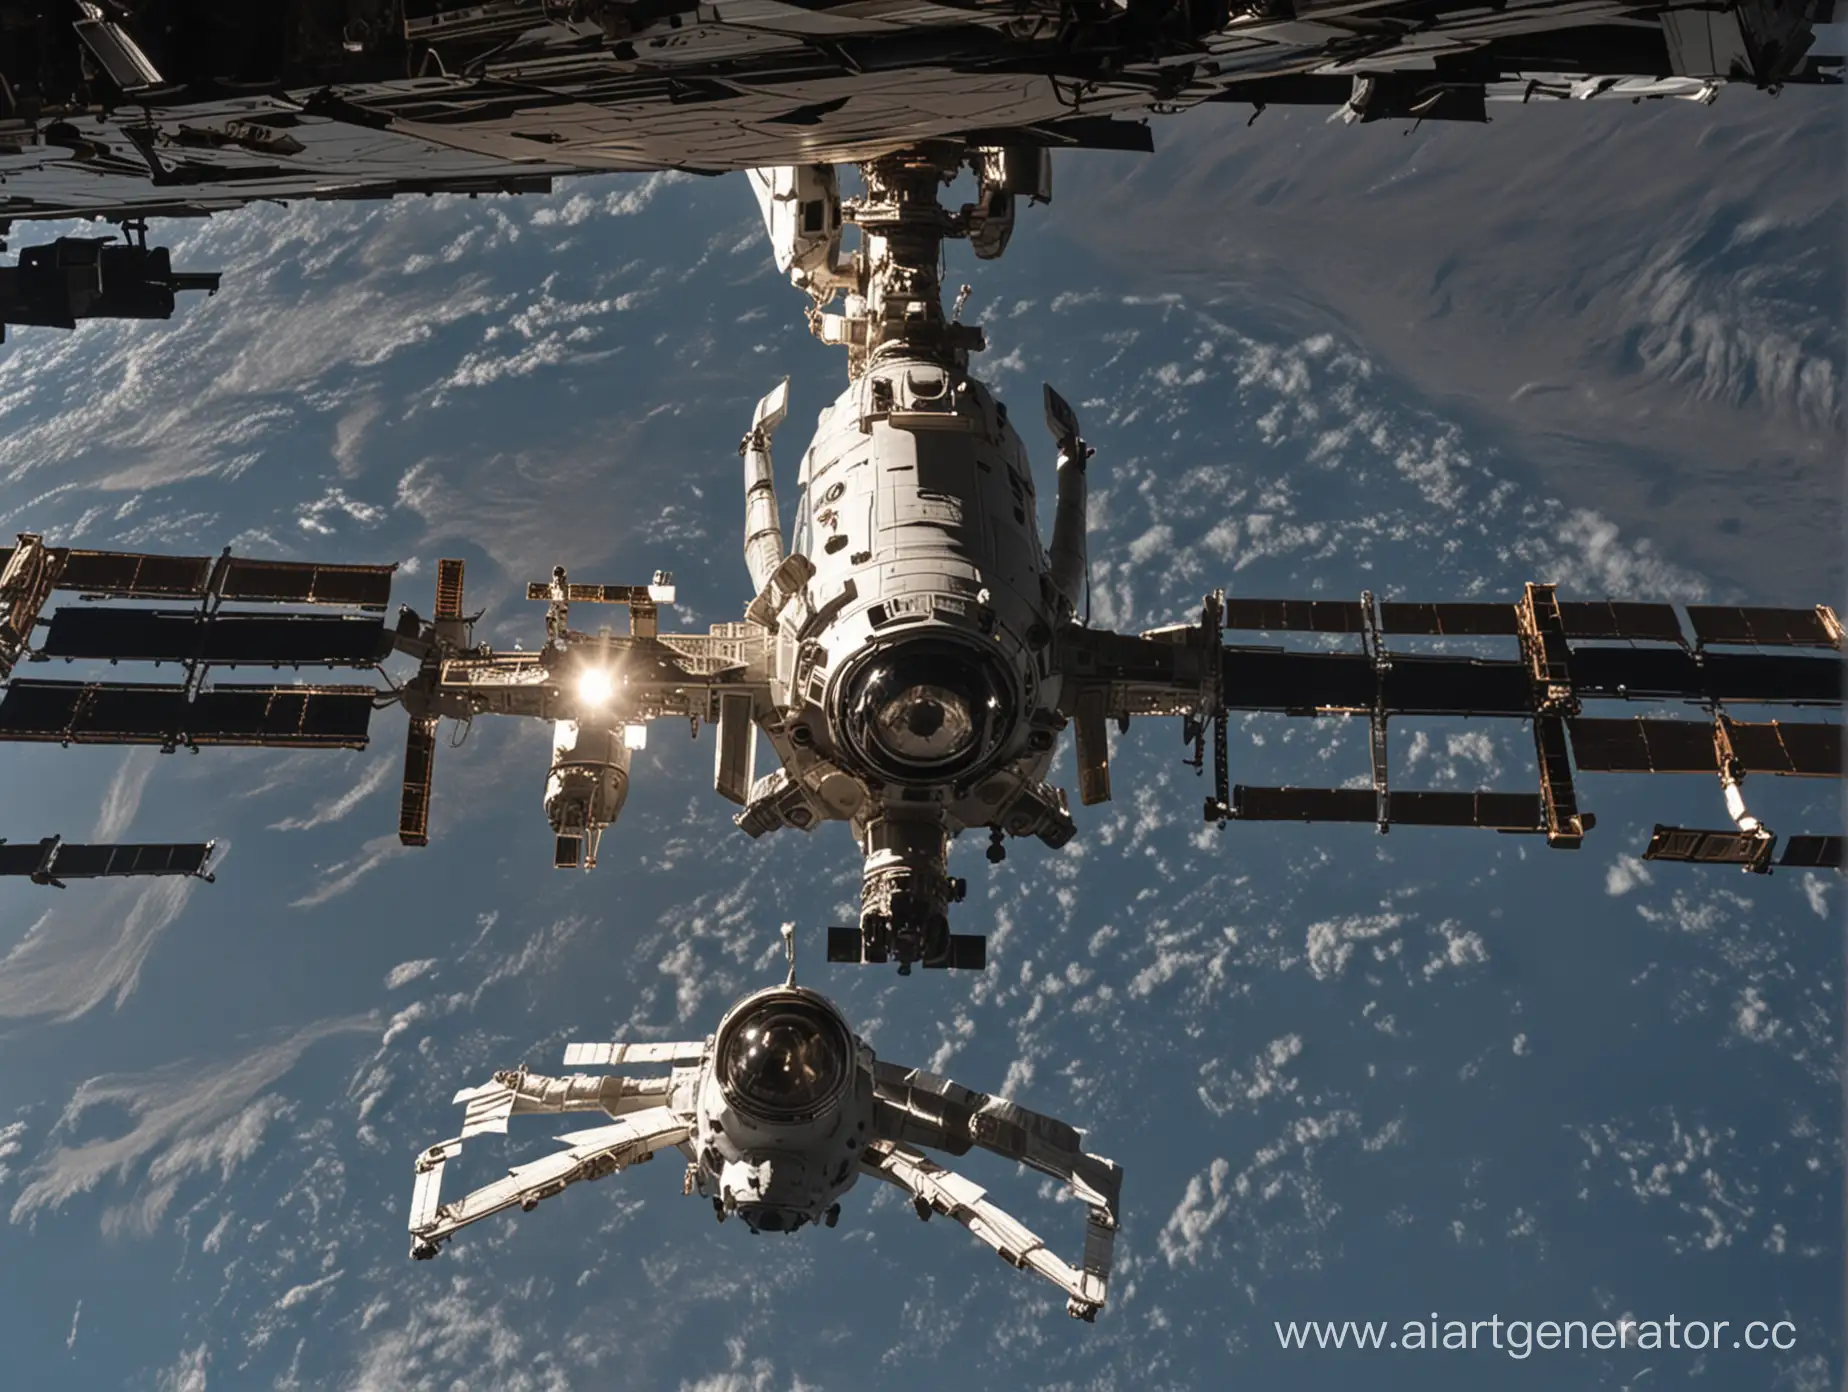 Alien-Spacecraft-Docking-with-the-International-Space-Station